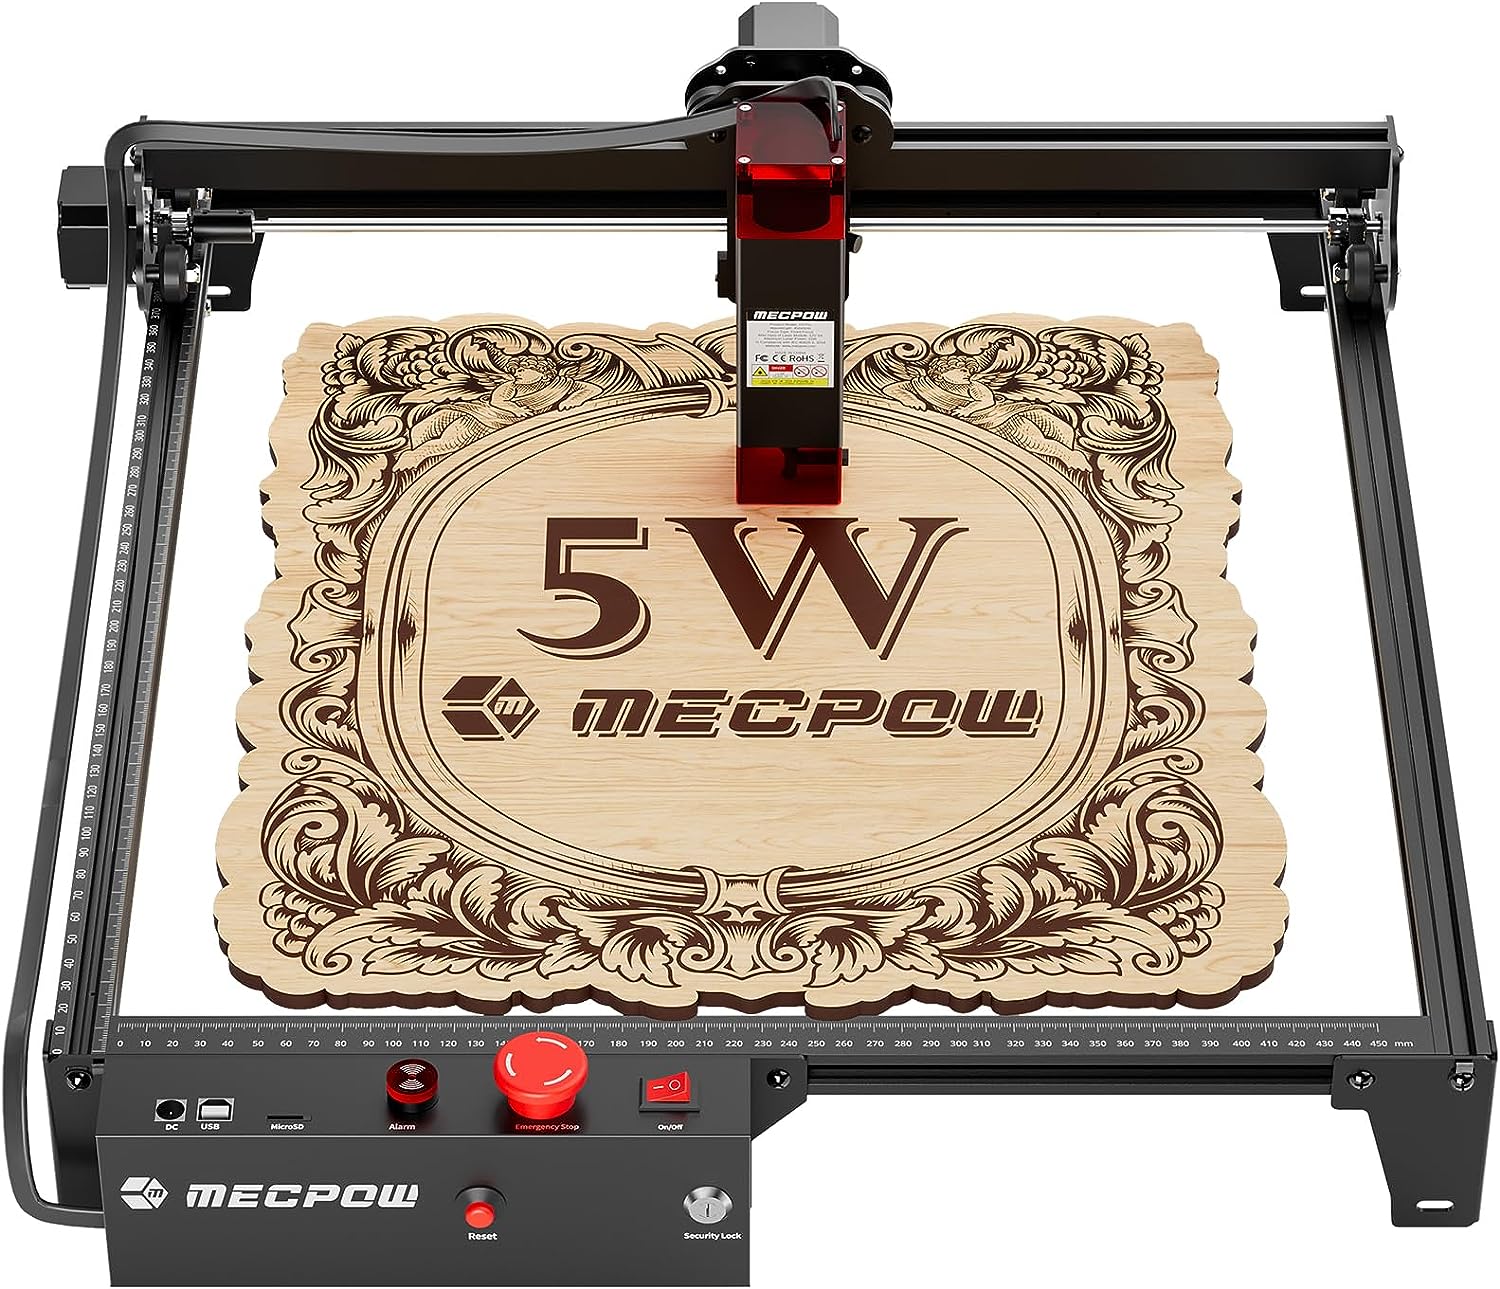 Mecpow X3 Laser Engraver, 60W Laser Cutter, 5W Output Laser Engraving Cutting Machine, Laser Engraver for Wood and Metal, Engraving Machine with Emergency Stop, Flame & Gyro Detection, 16.0 x 15.7"